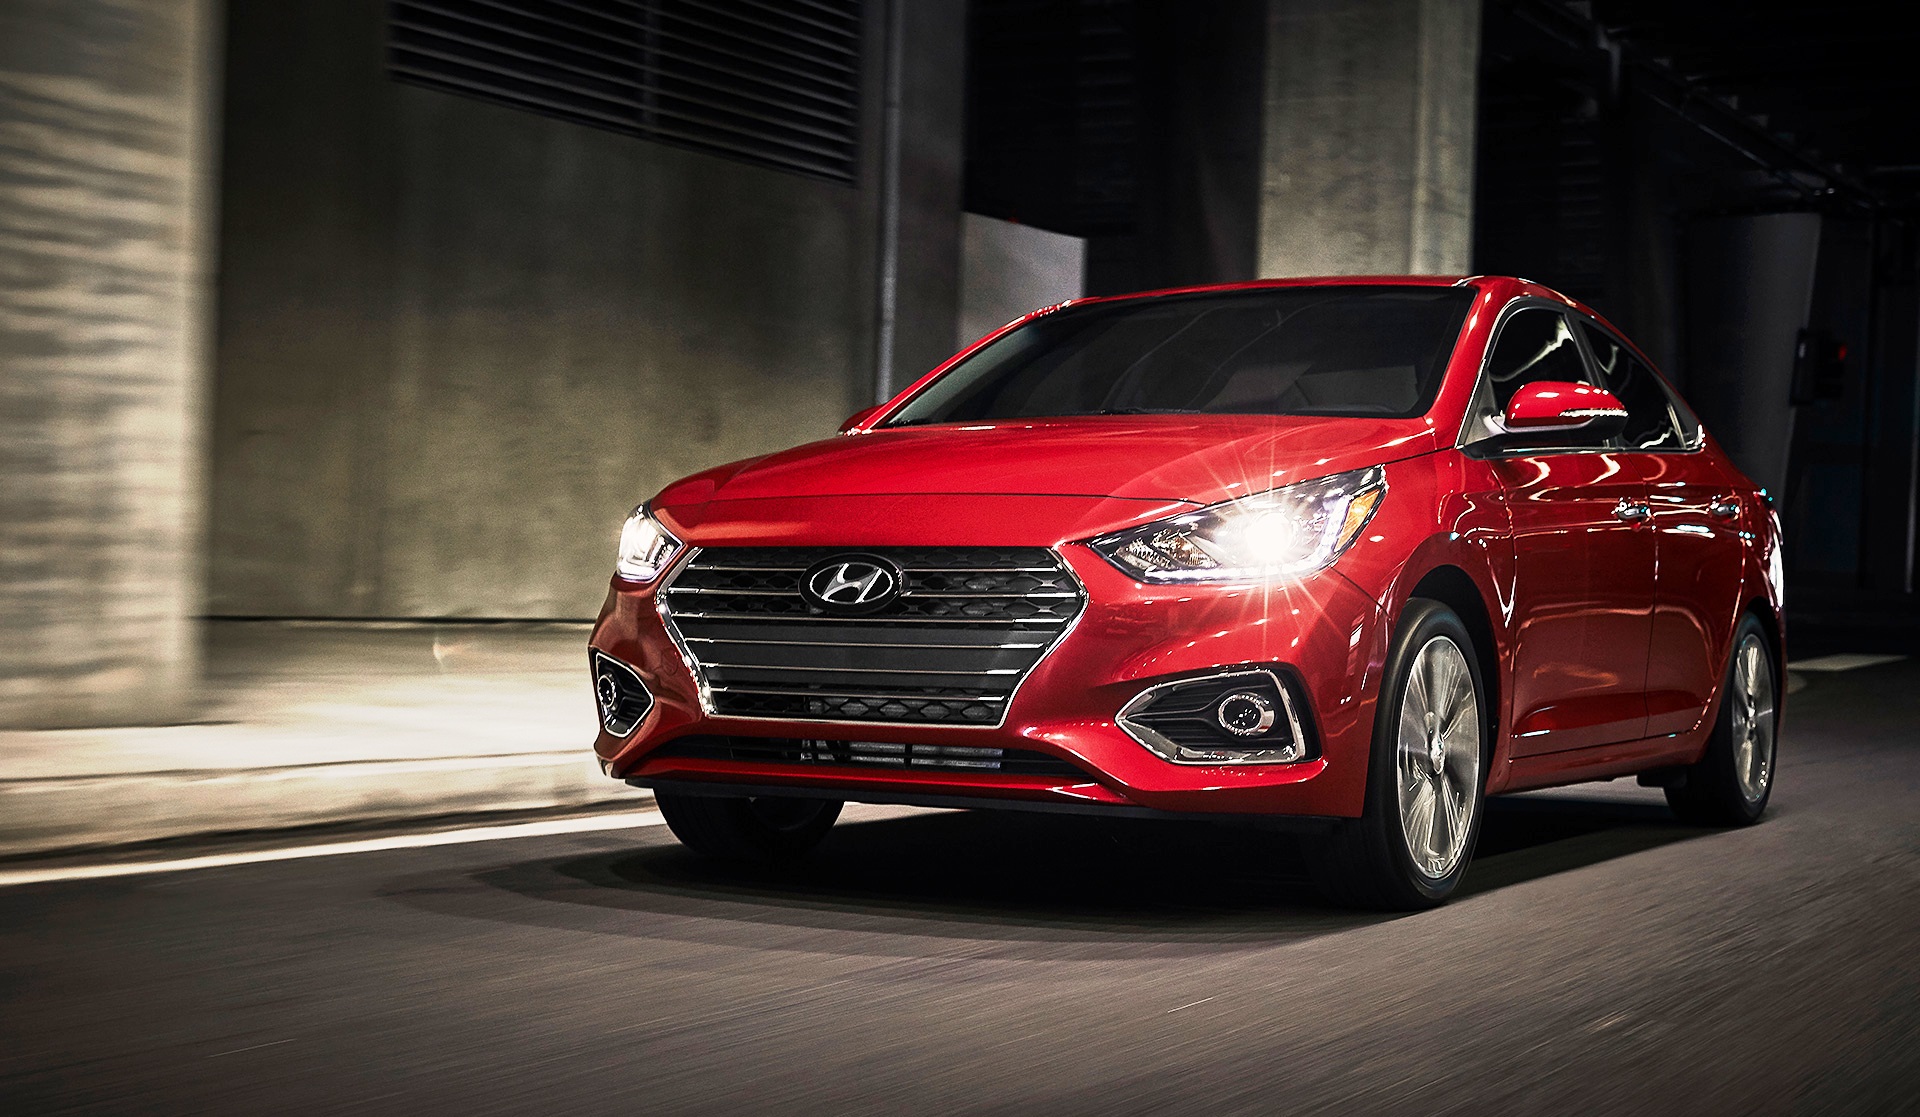 All-New Hyundai Accent to Be Launched Late March - Autos Community